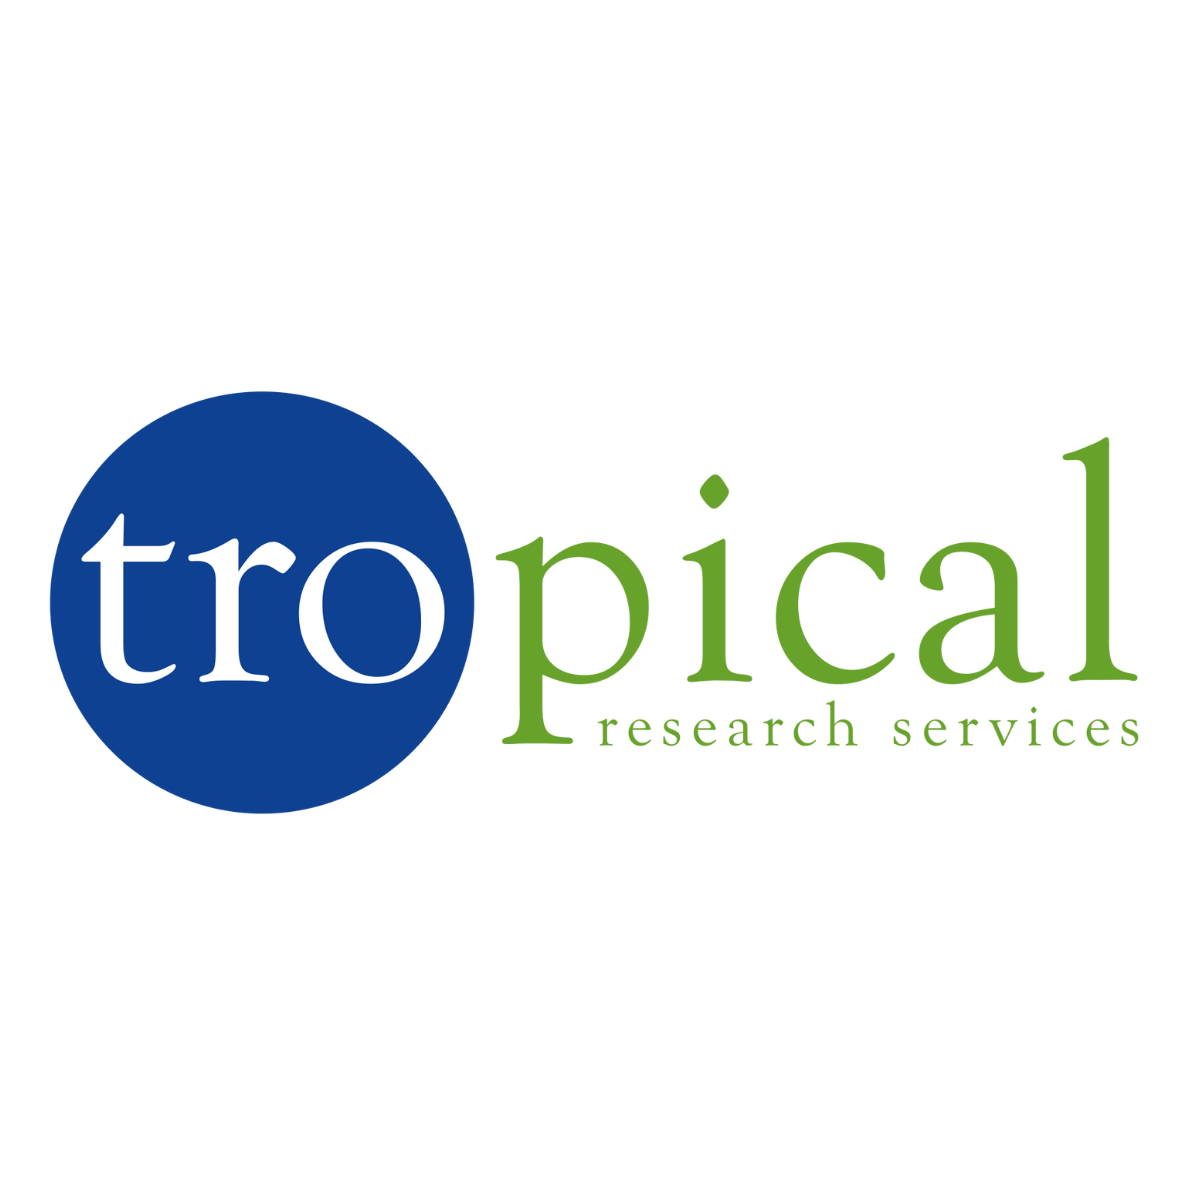 Tropical Research Services